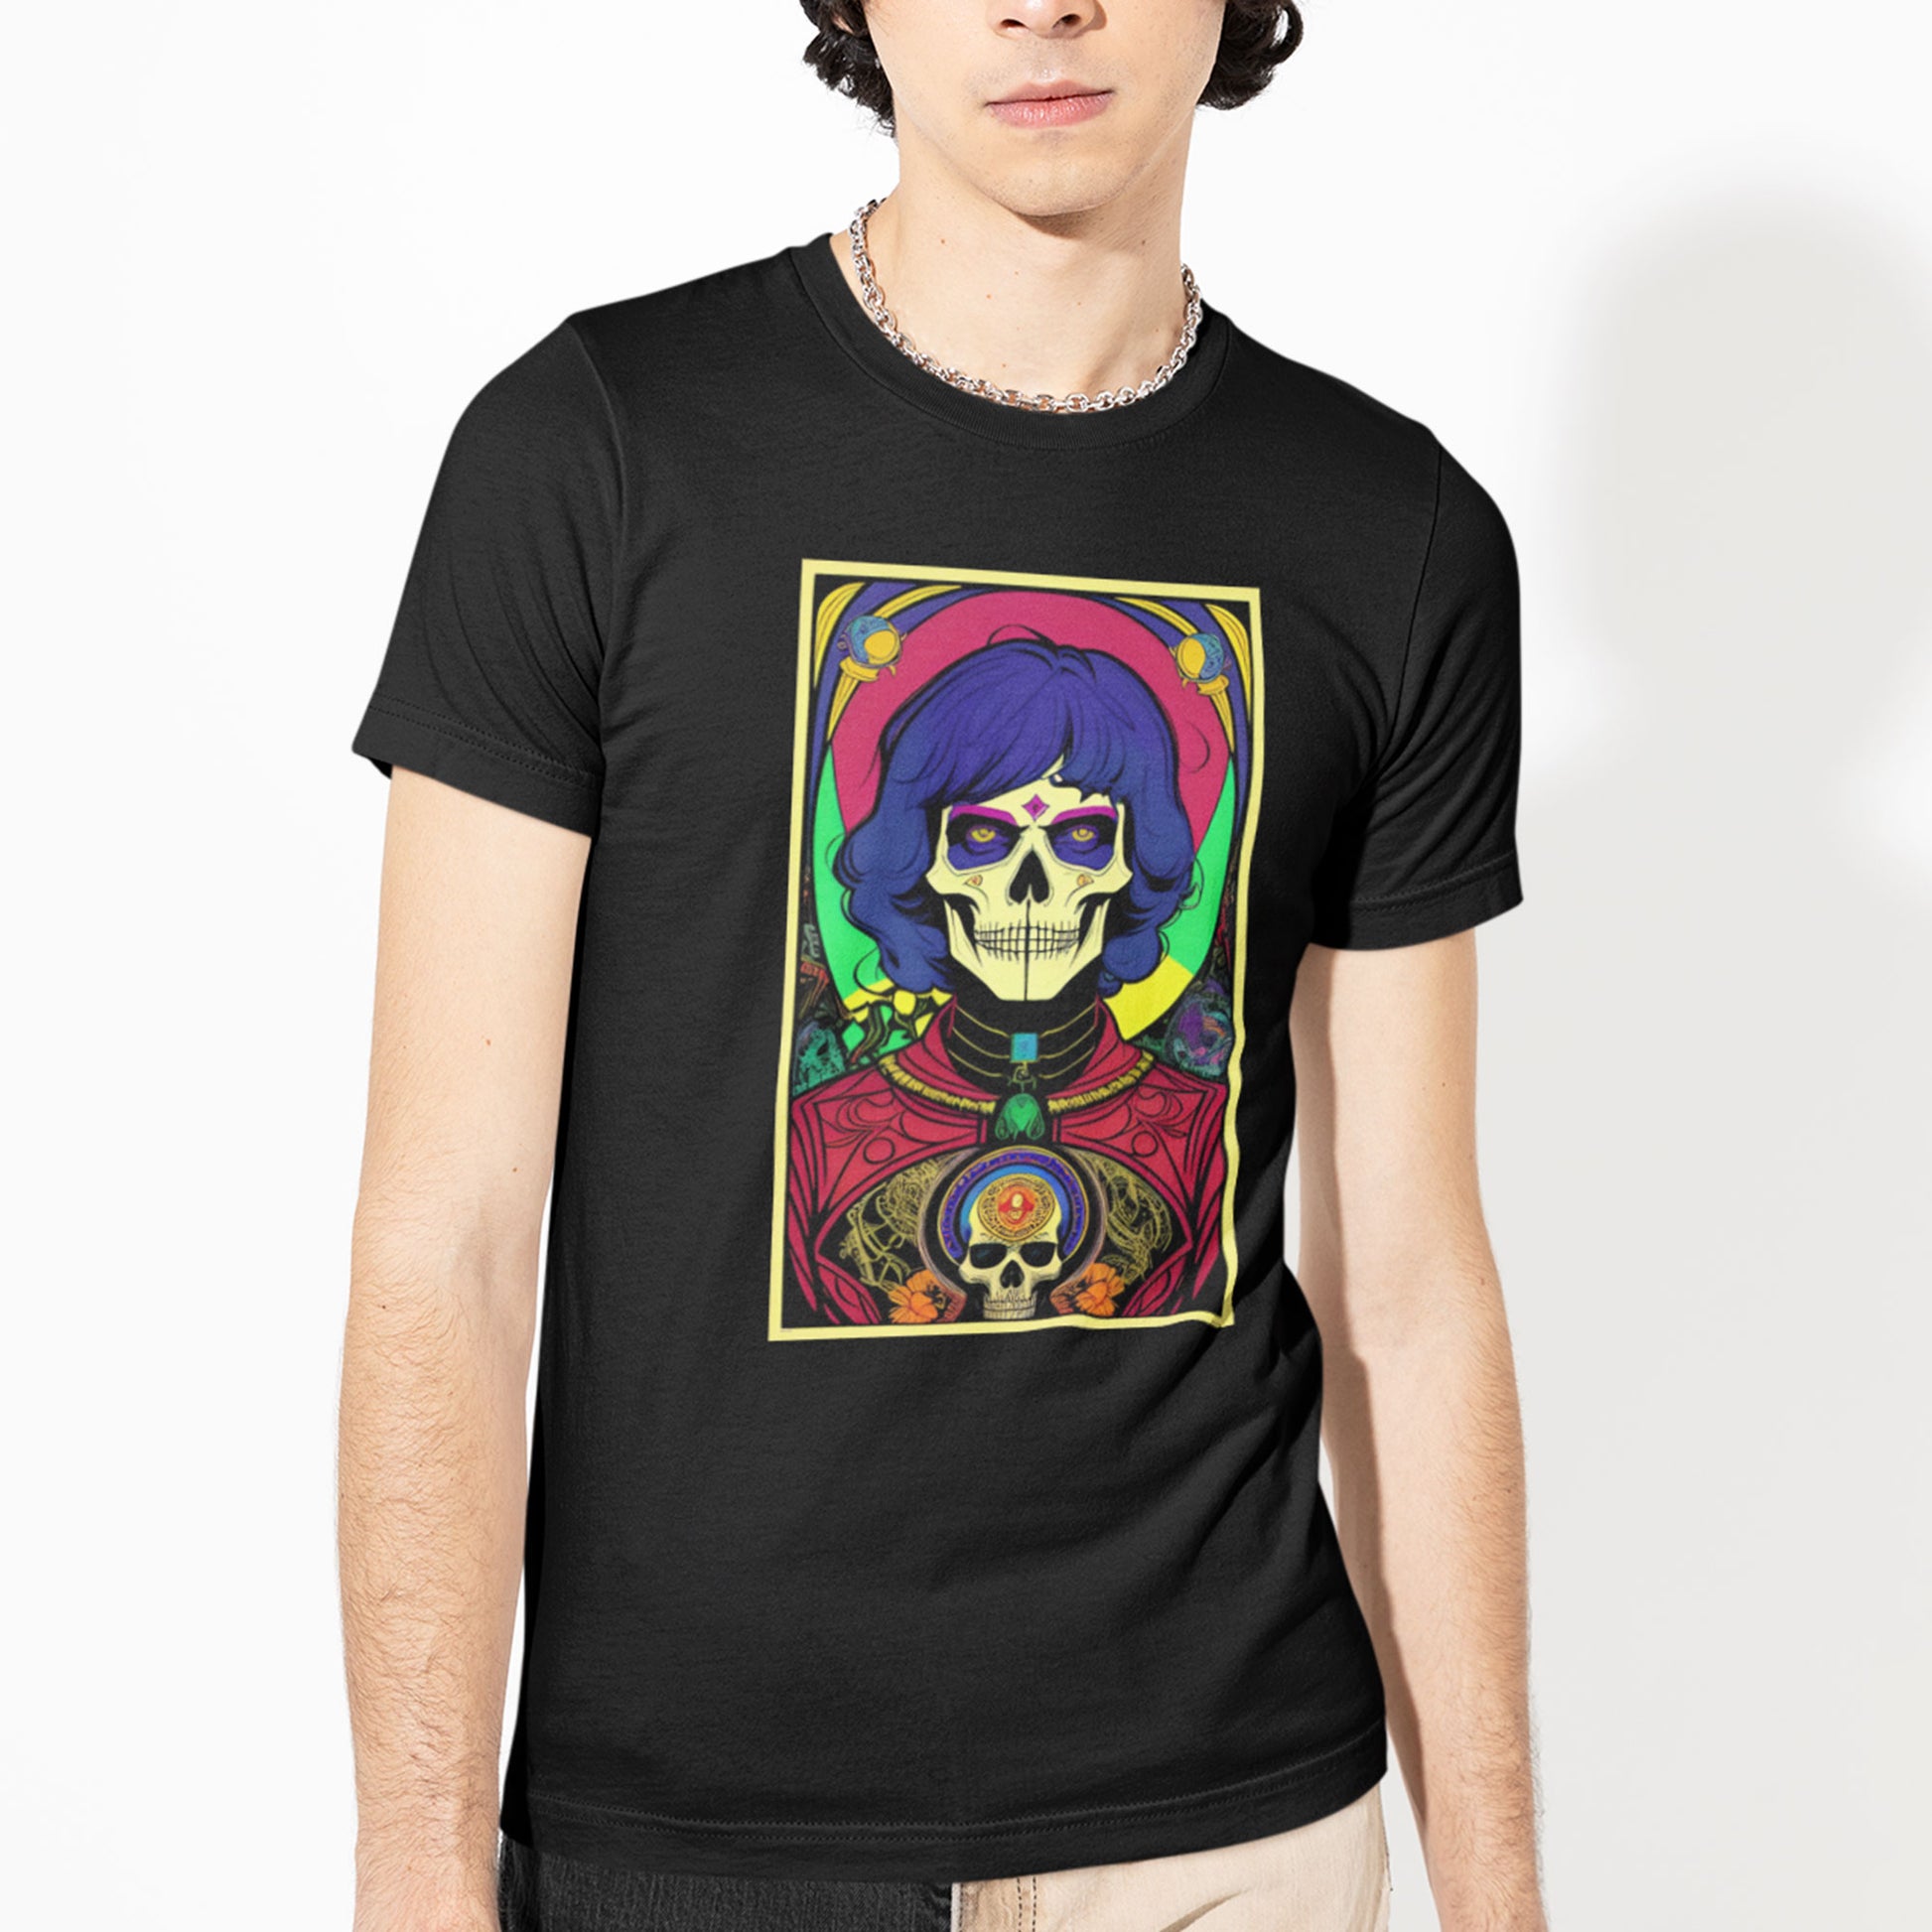 A man wearing a black Bella Canvas t-shirt featuring a psychedelic pop art illustration of Death